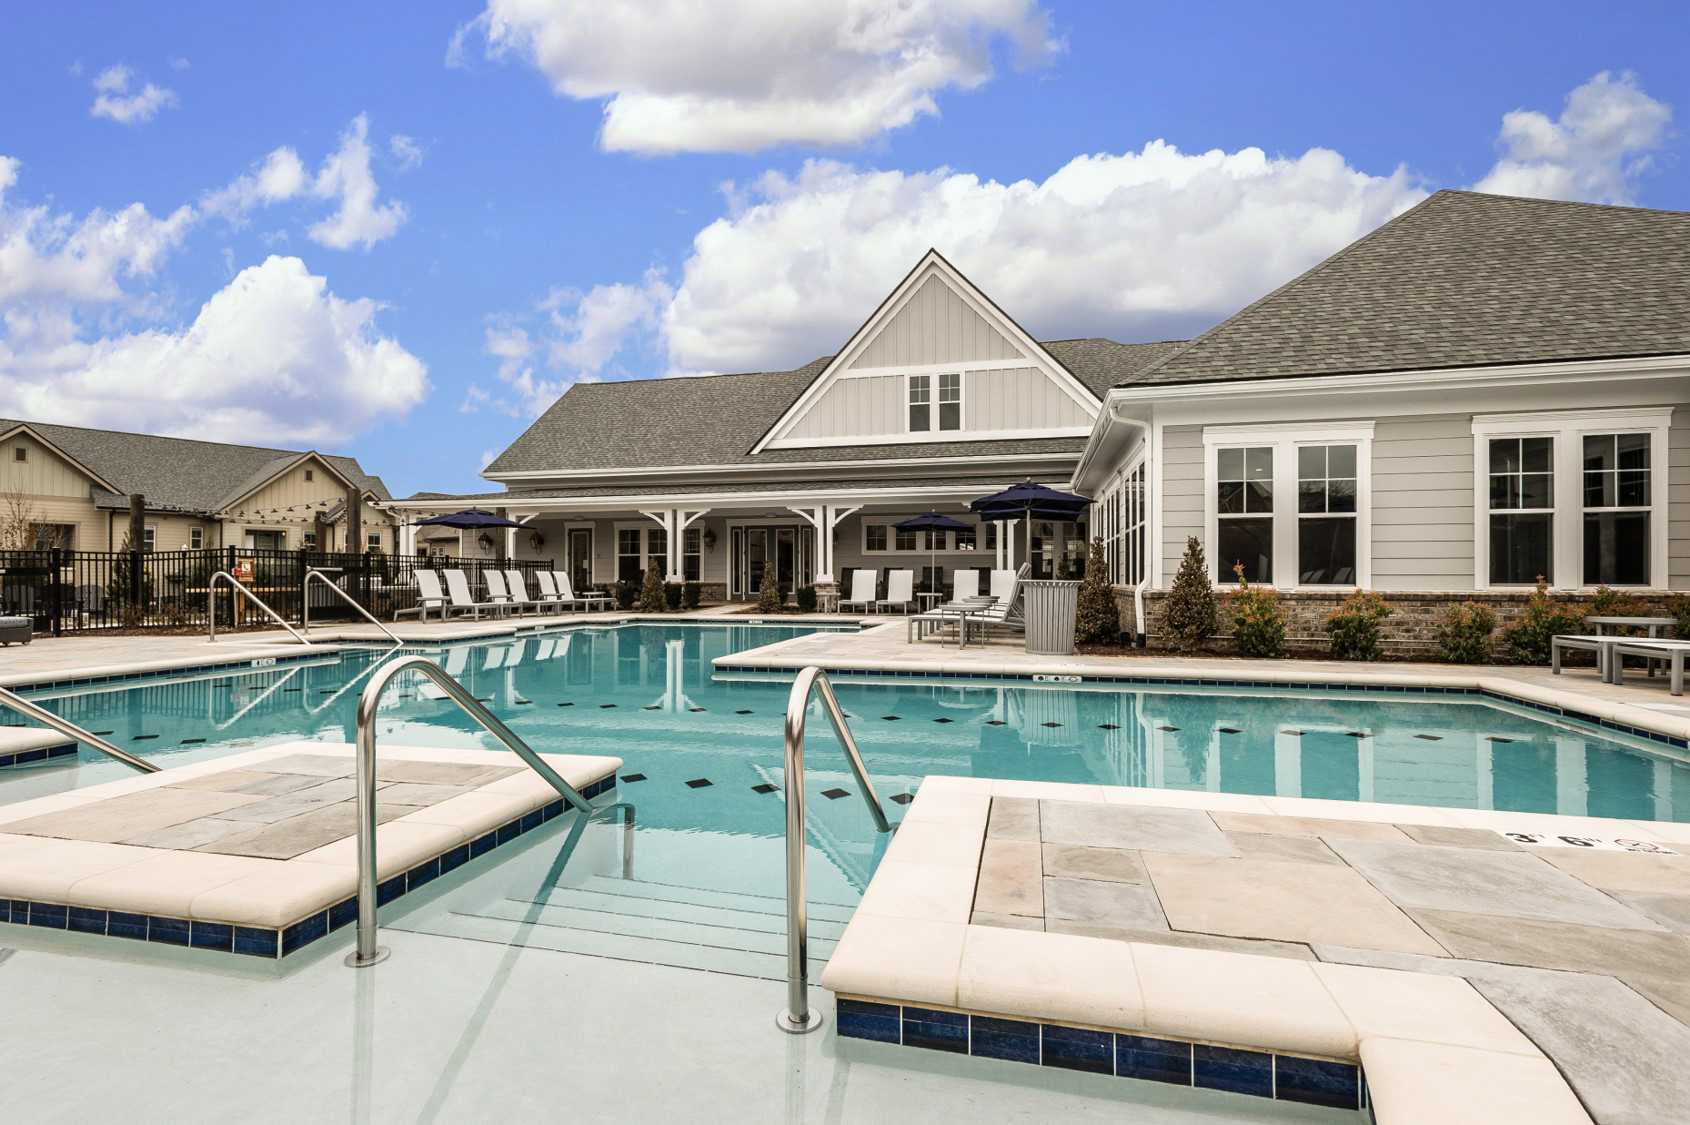 High end apartment complex pool area with pool house